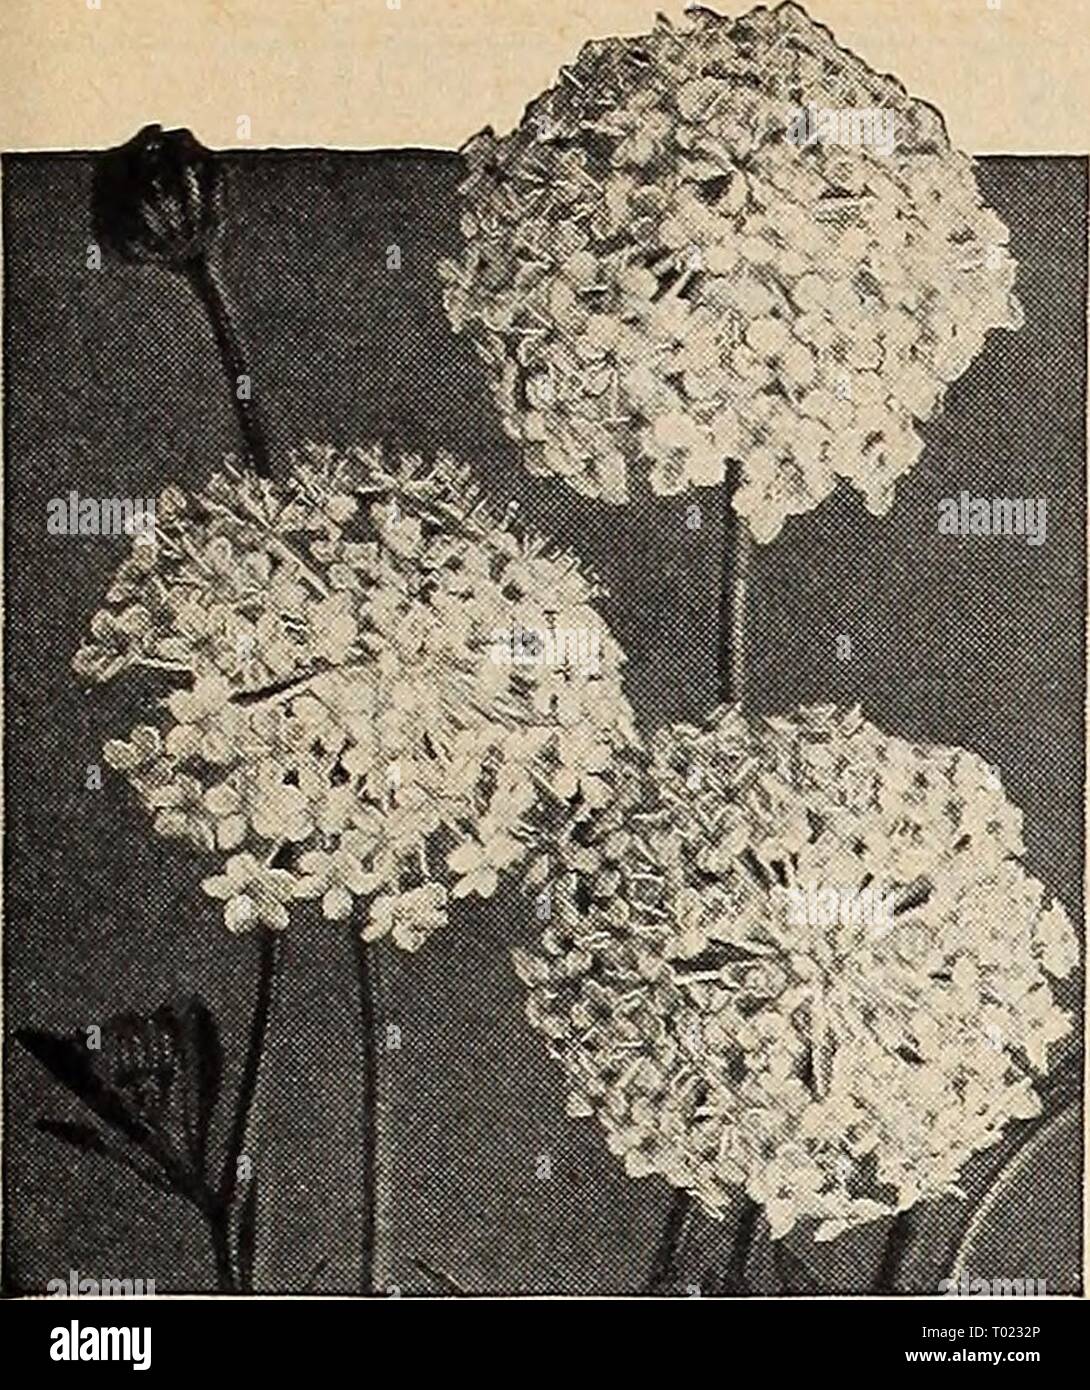 Dreer's garden book for 1941 . dreersgardenbook1941henr Year: 1941  Didiscus—Blue Lace Flower DidlSCUS Blue Lace Flower ® 2311 Coeruleus. Showy, lacy, light lavender flower heads borne profusely from July to frost. For borders and cutting. 18 inches. Pkt. 10c; large pkt. 30c. Digitalis—Foxglove ® ® Handsome biennials producing stately flower spikes during June. Splendid for naturalizing and most successful in semi- shade. The plants grow from 3 to 5 feet tall. Gloxiniaeflora 2315 Isabellina. Yellow.. . Any color: 2317 Purple ( Pkt. 10c; 2318 Rose ( large pkt. 2319 White / 30c. 2321 Giant Shir Stock Photo